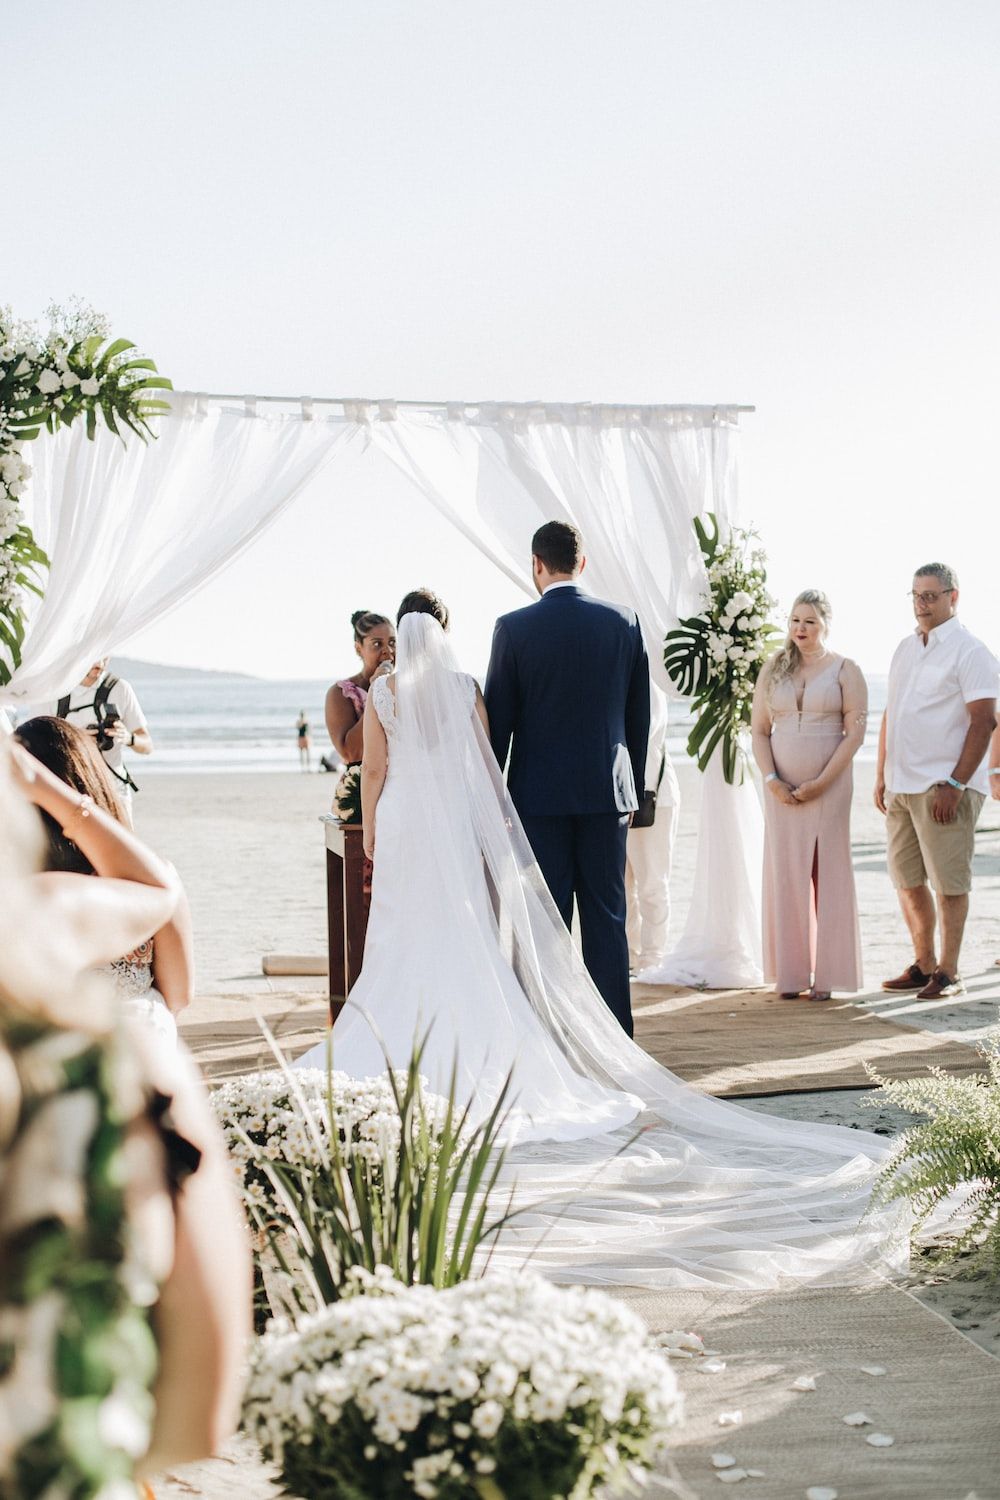 A couple getting married on the beach with a beautiful backdrop. - Wedding